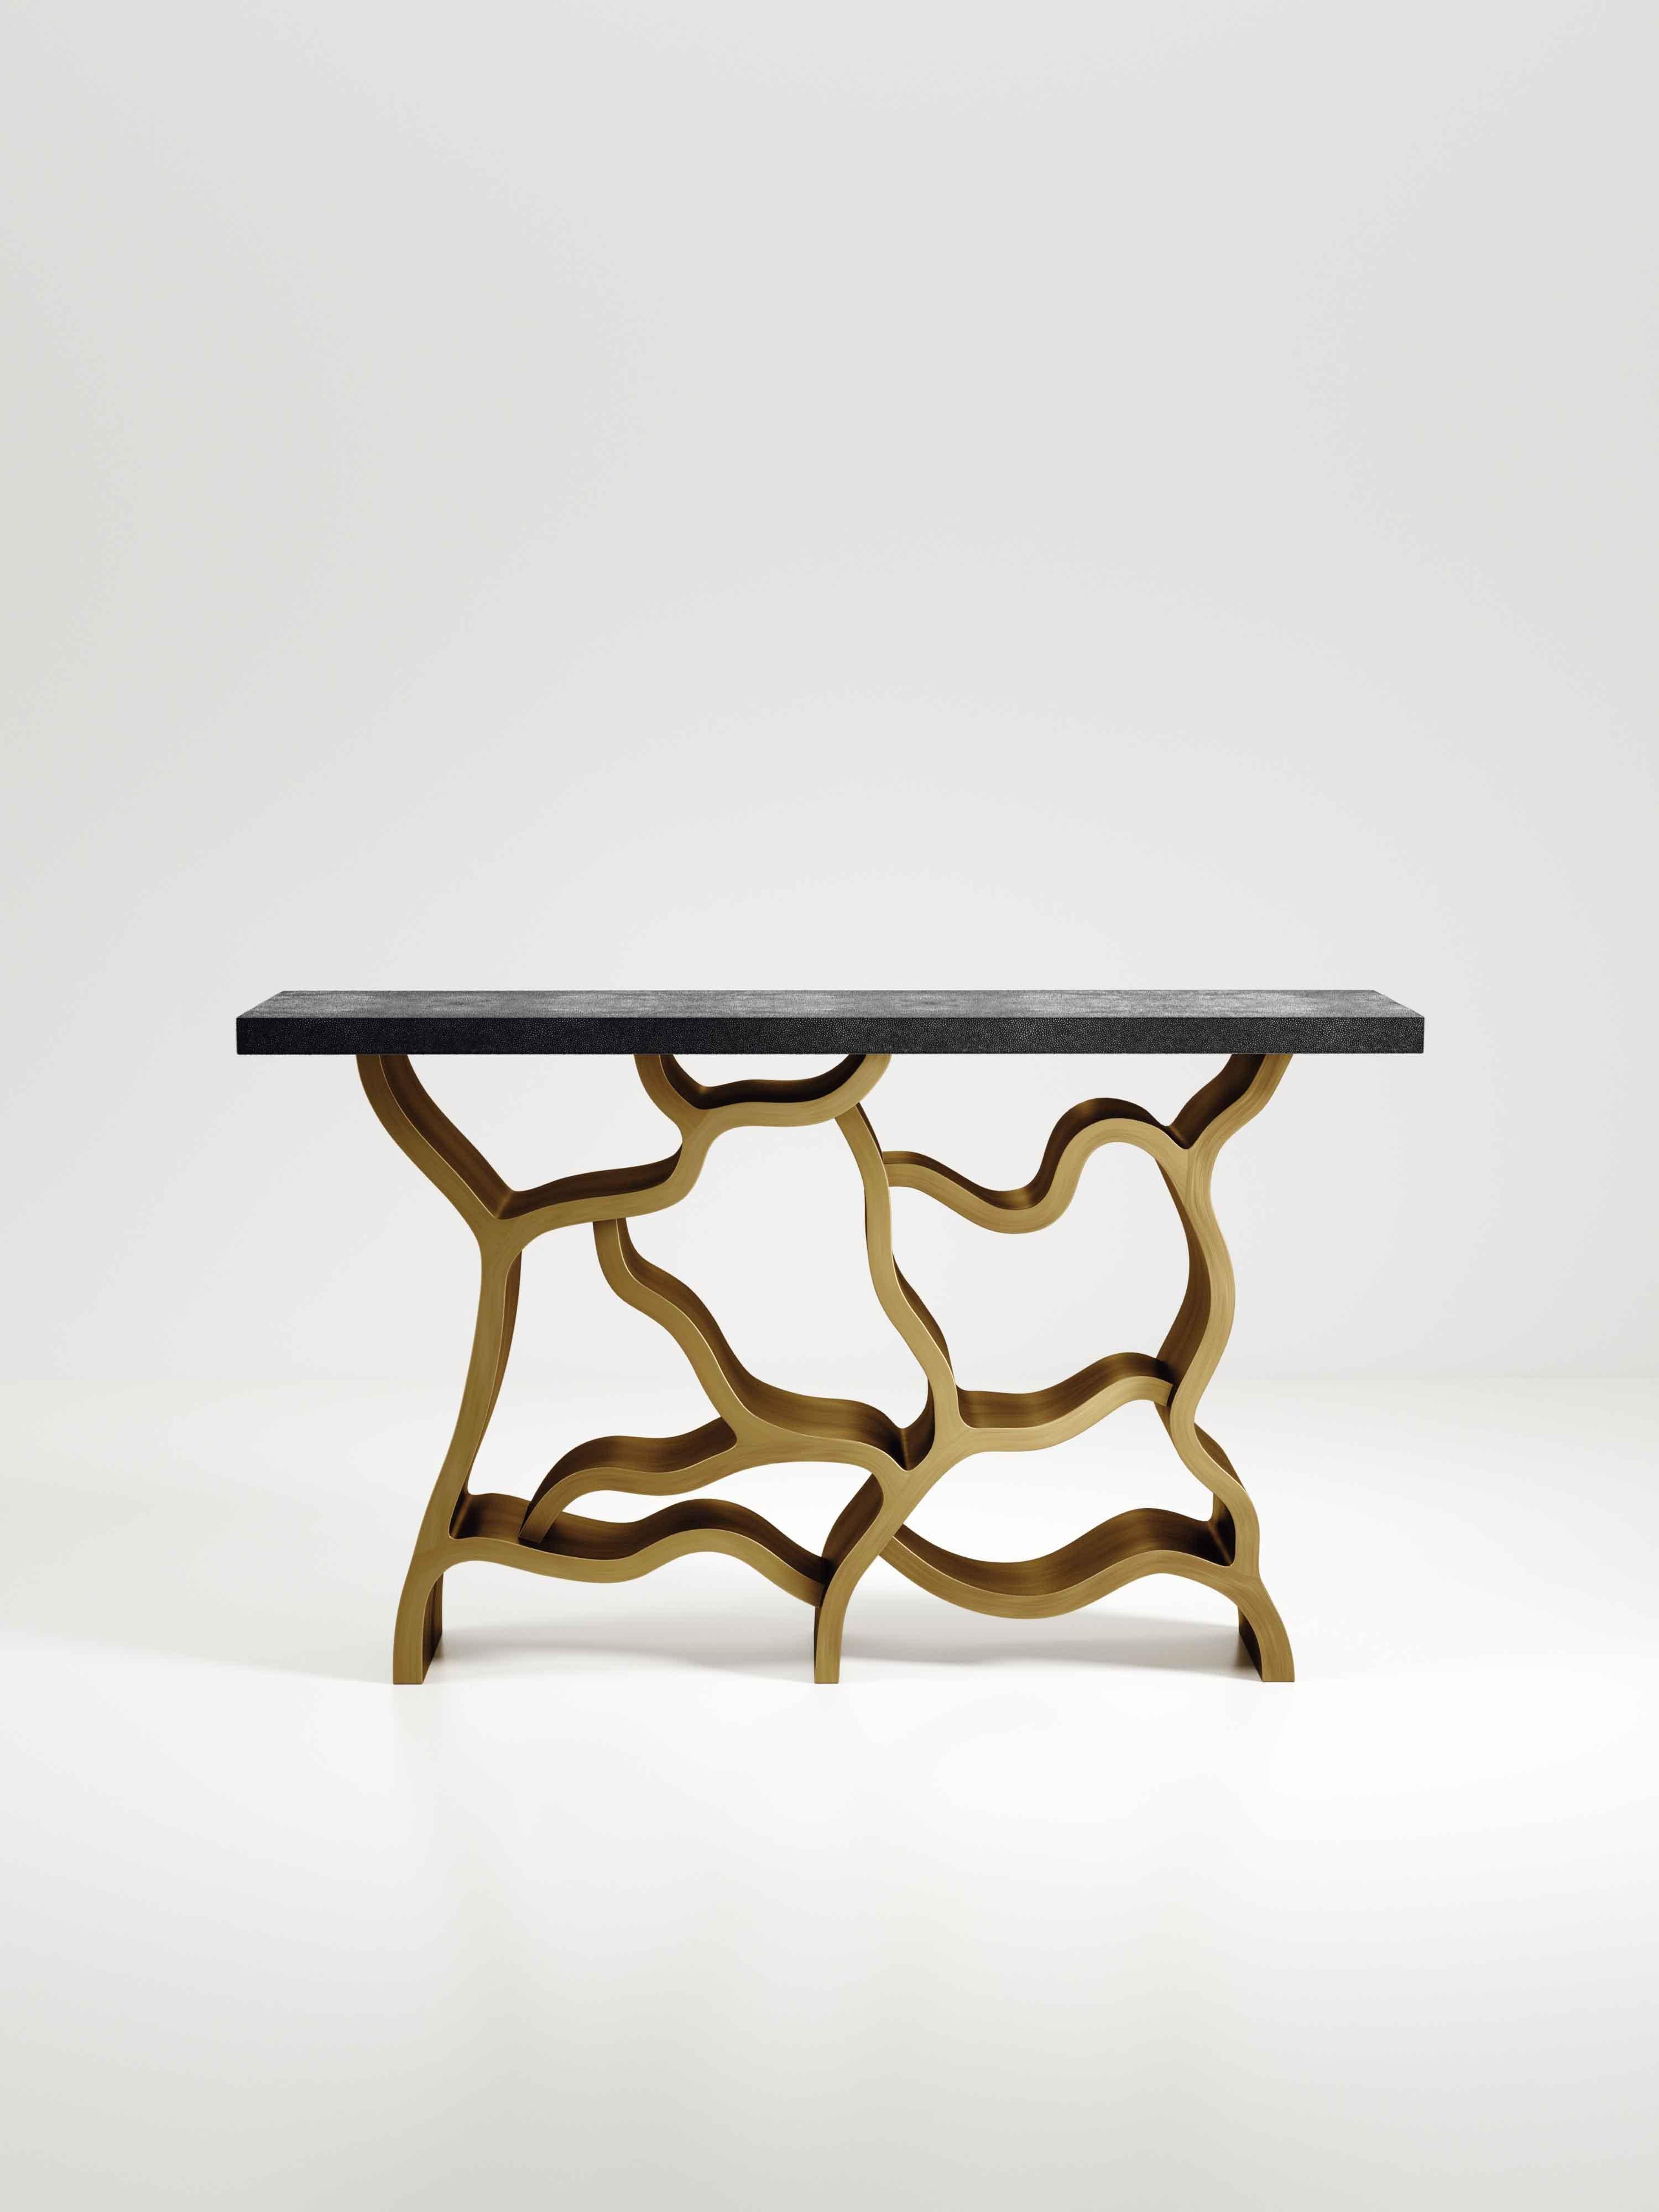 The Leaf Console Table by Kifu Paris is a dramatic and organic piece. The coal black shagreen inlaid rectangle top sits on a striking bronze-patina brass base that emulates intertwining branches. This piece is designed by Kifu Augousti the daughter